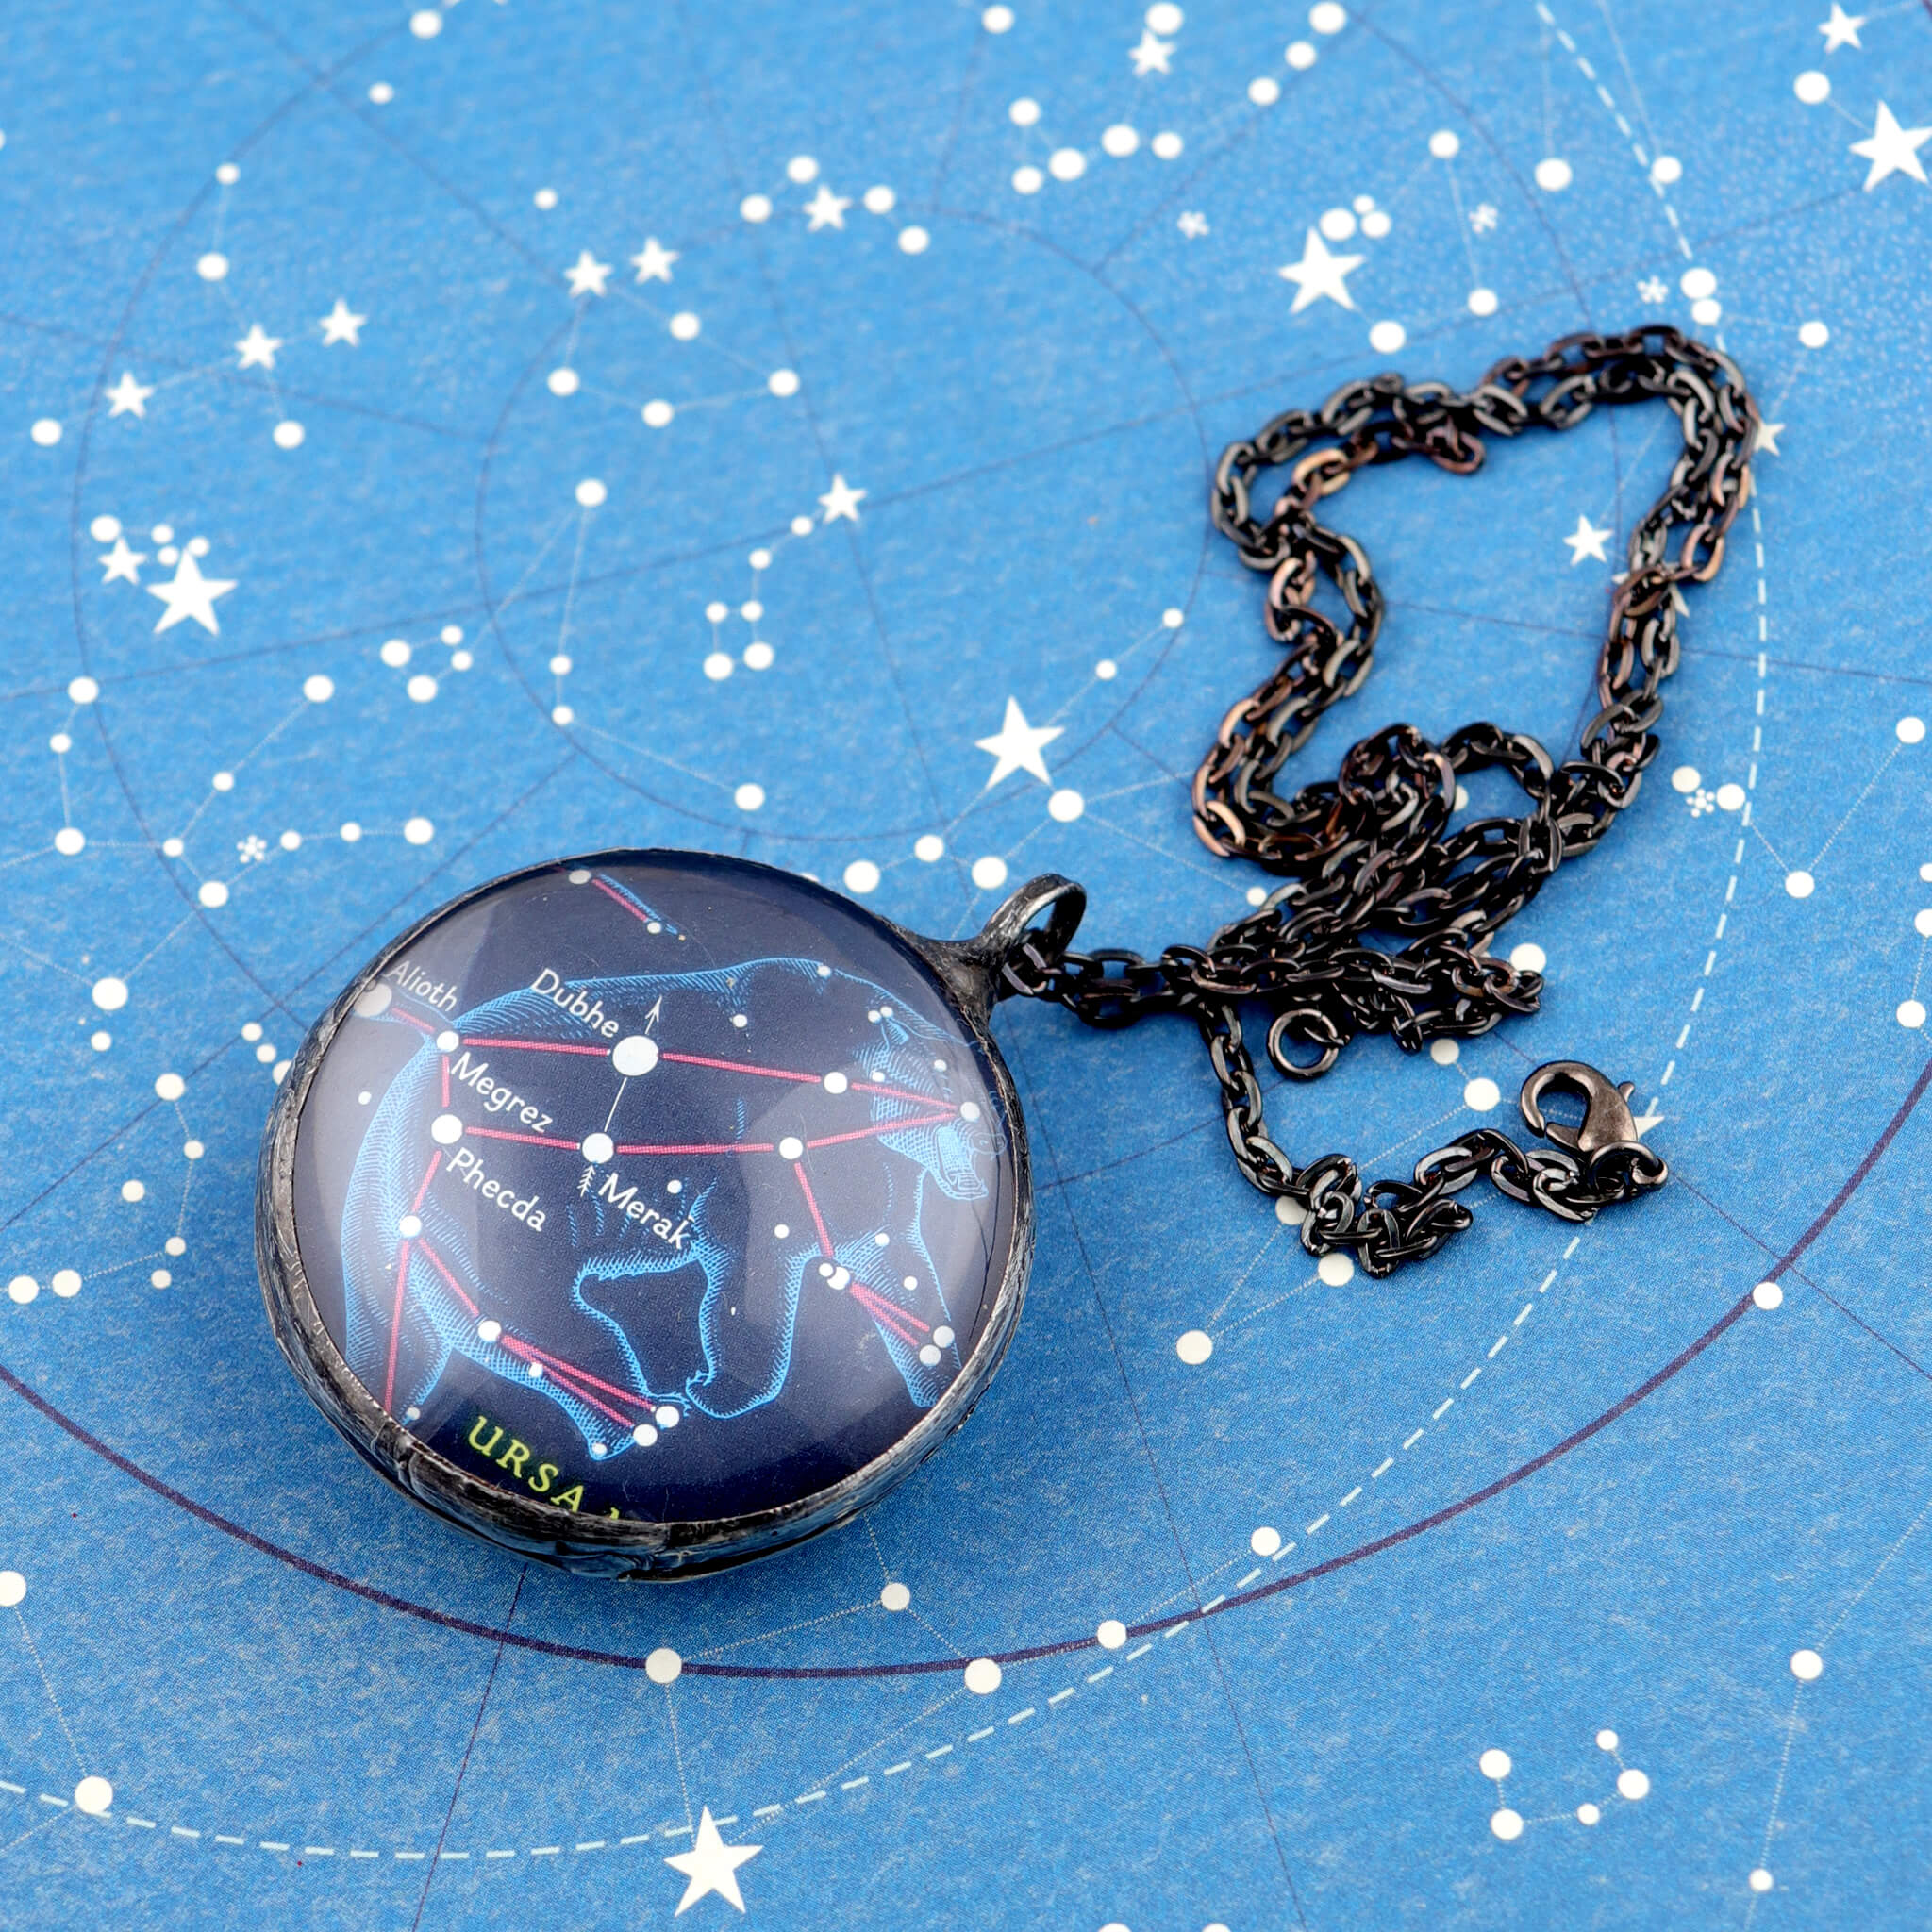 Ursa Major stained glass necklace lying on celestial stationery